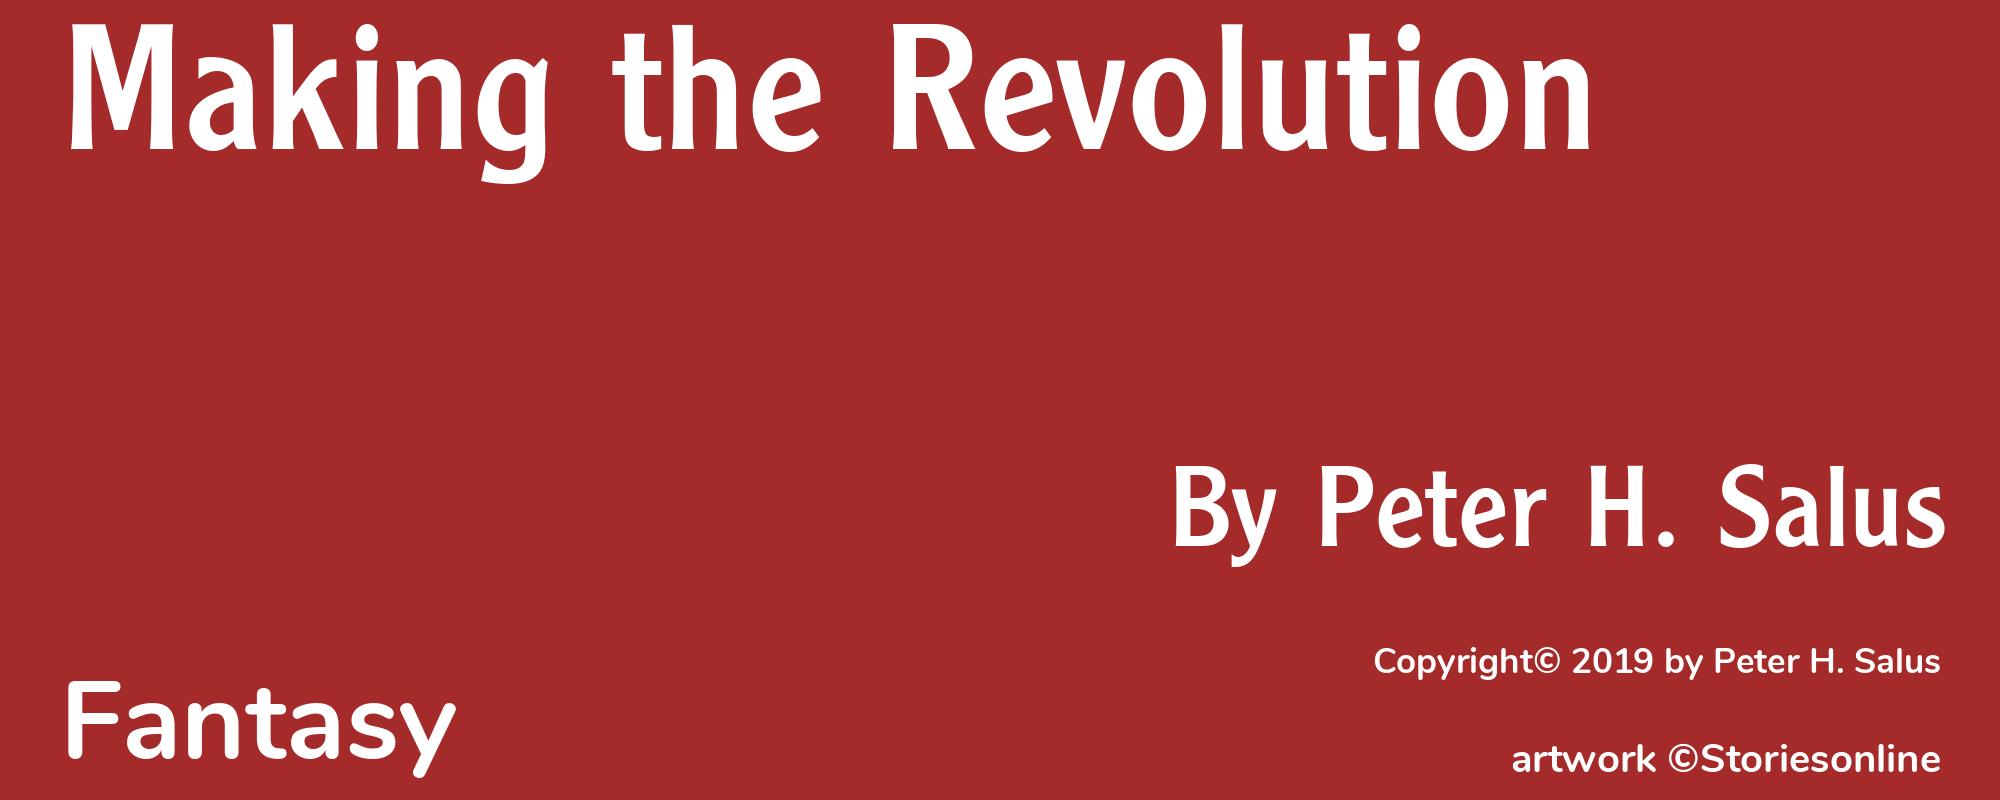 Making the Revolution - Cover